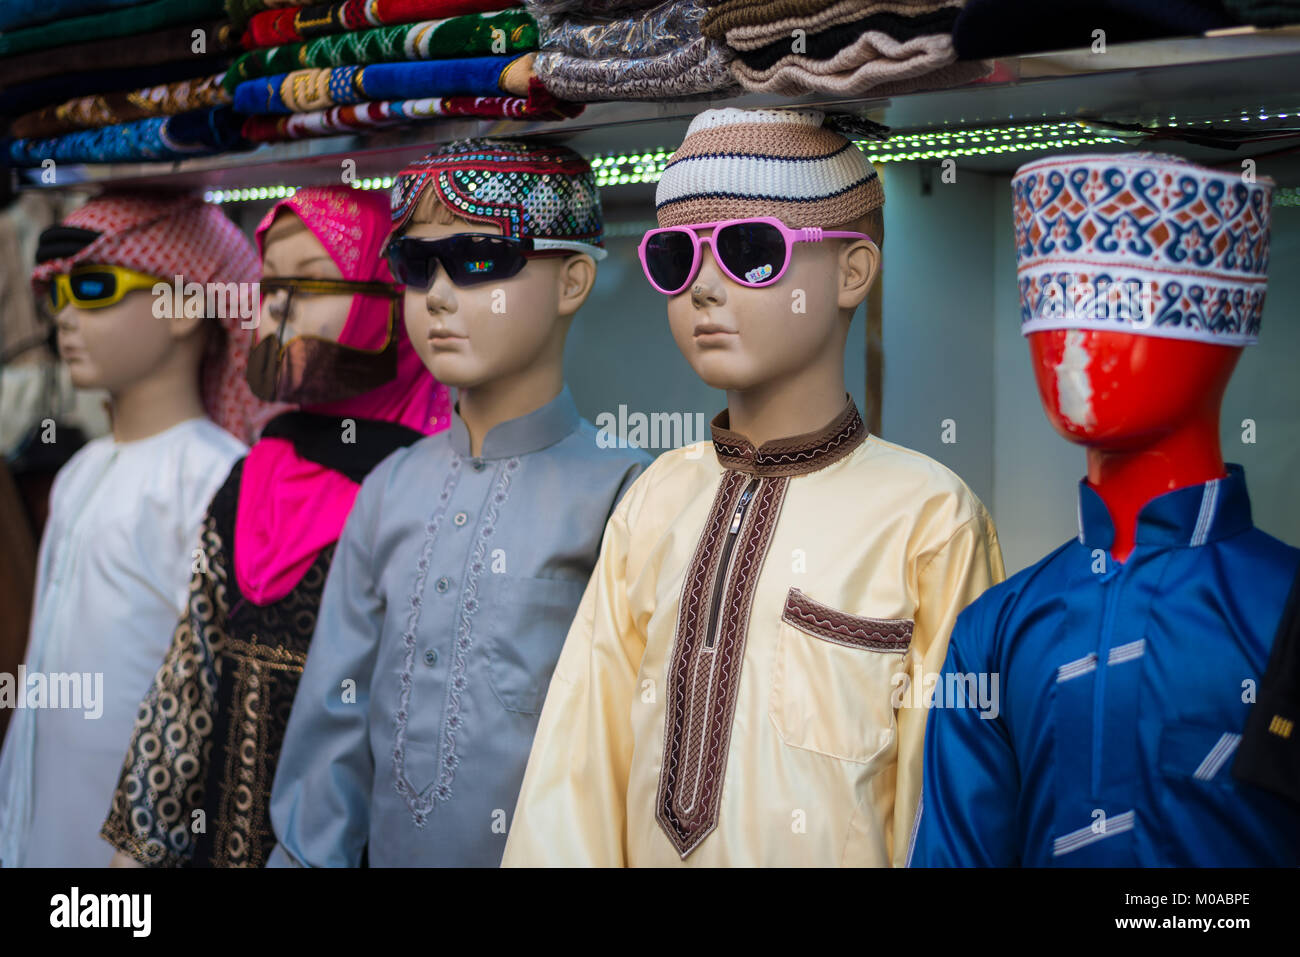 Traditional clothing in one of the local shops in Bur Dubai, UAE, United Arab Emirates Stock Photo